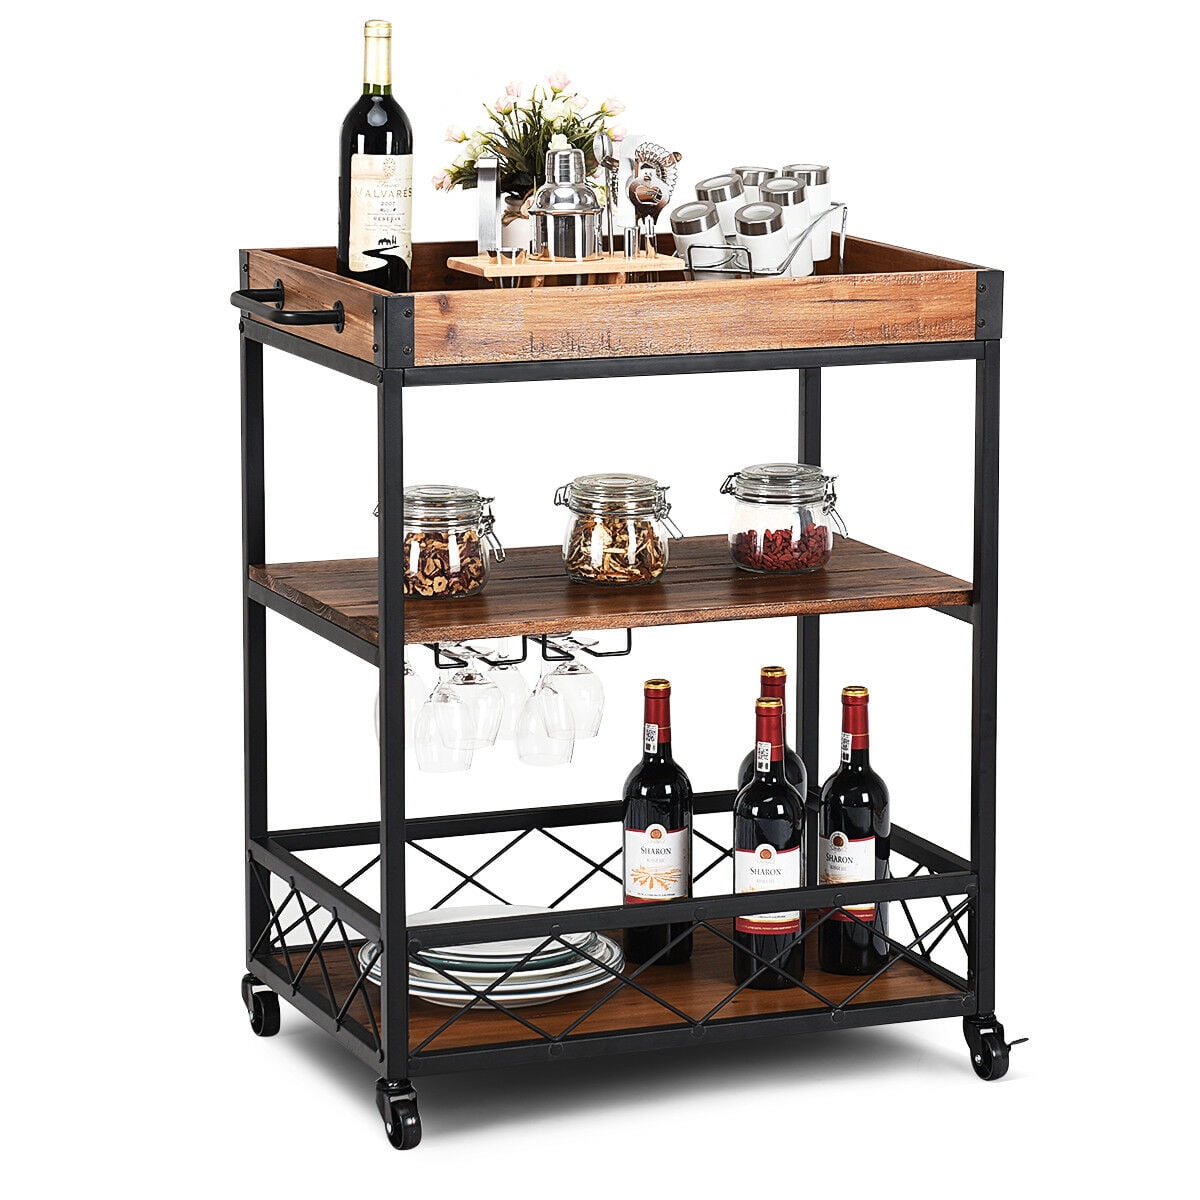 Details about   charaHOME Industrial Kitchen Serving Carts Rolling Bar Cart with 3 Tier Storage